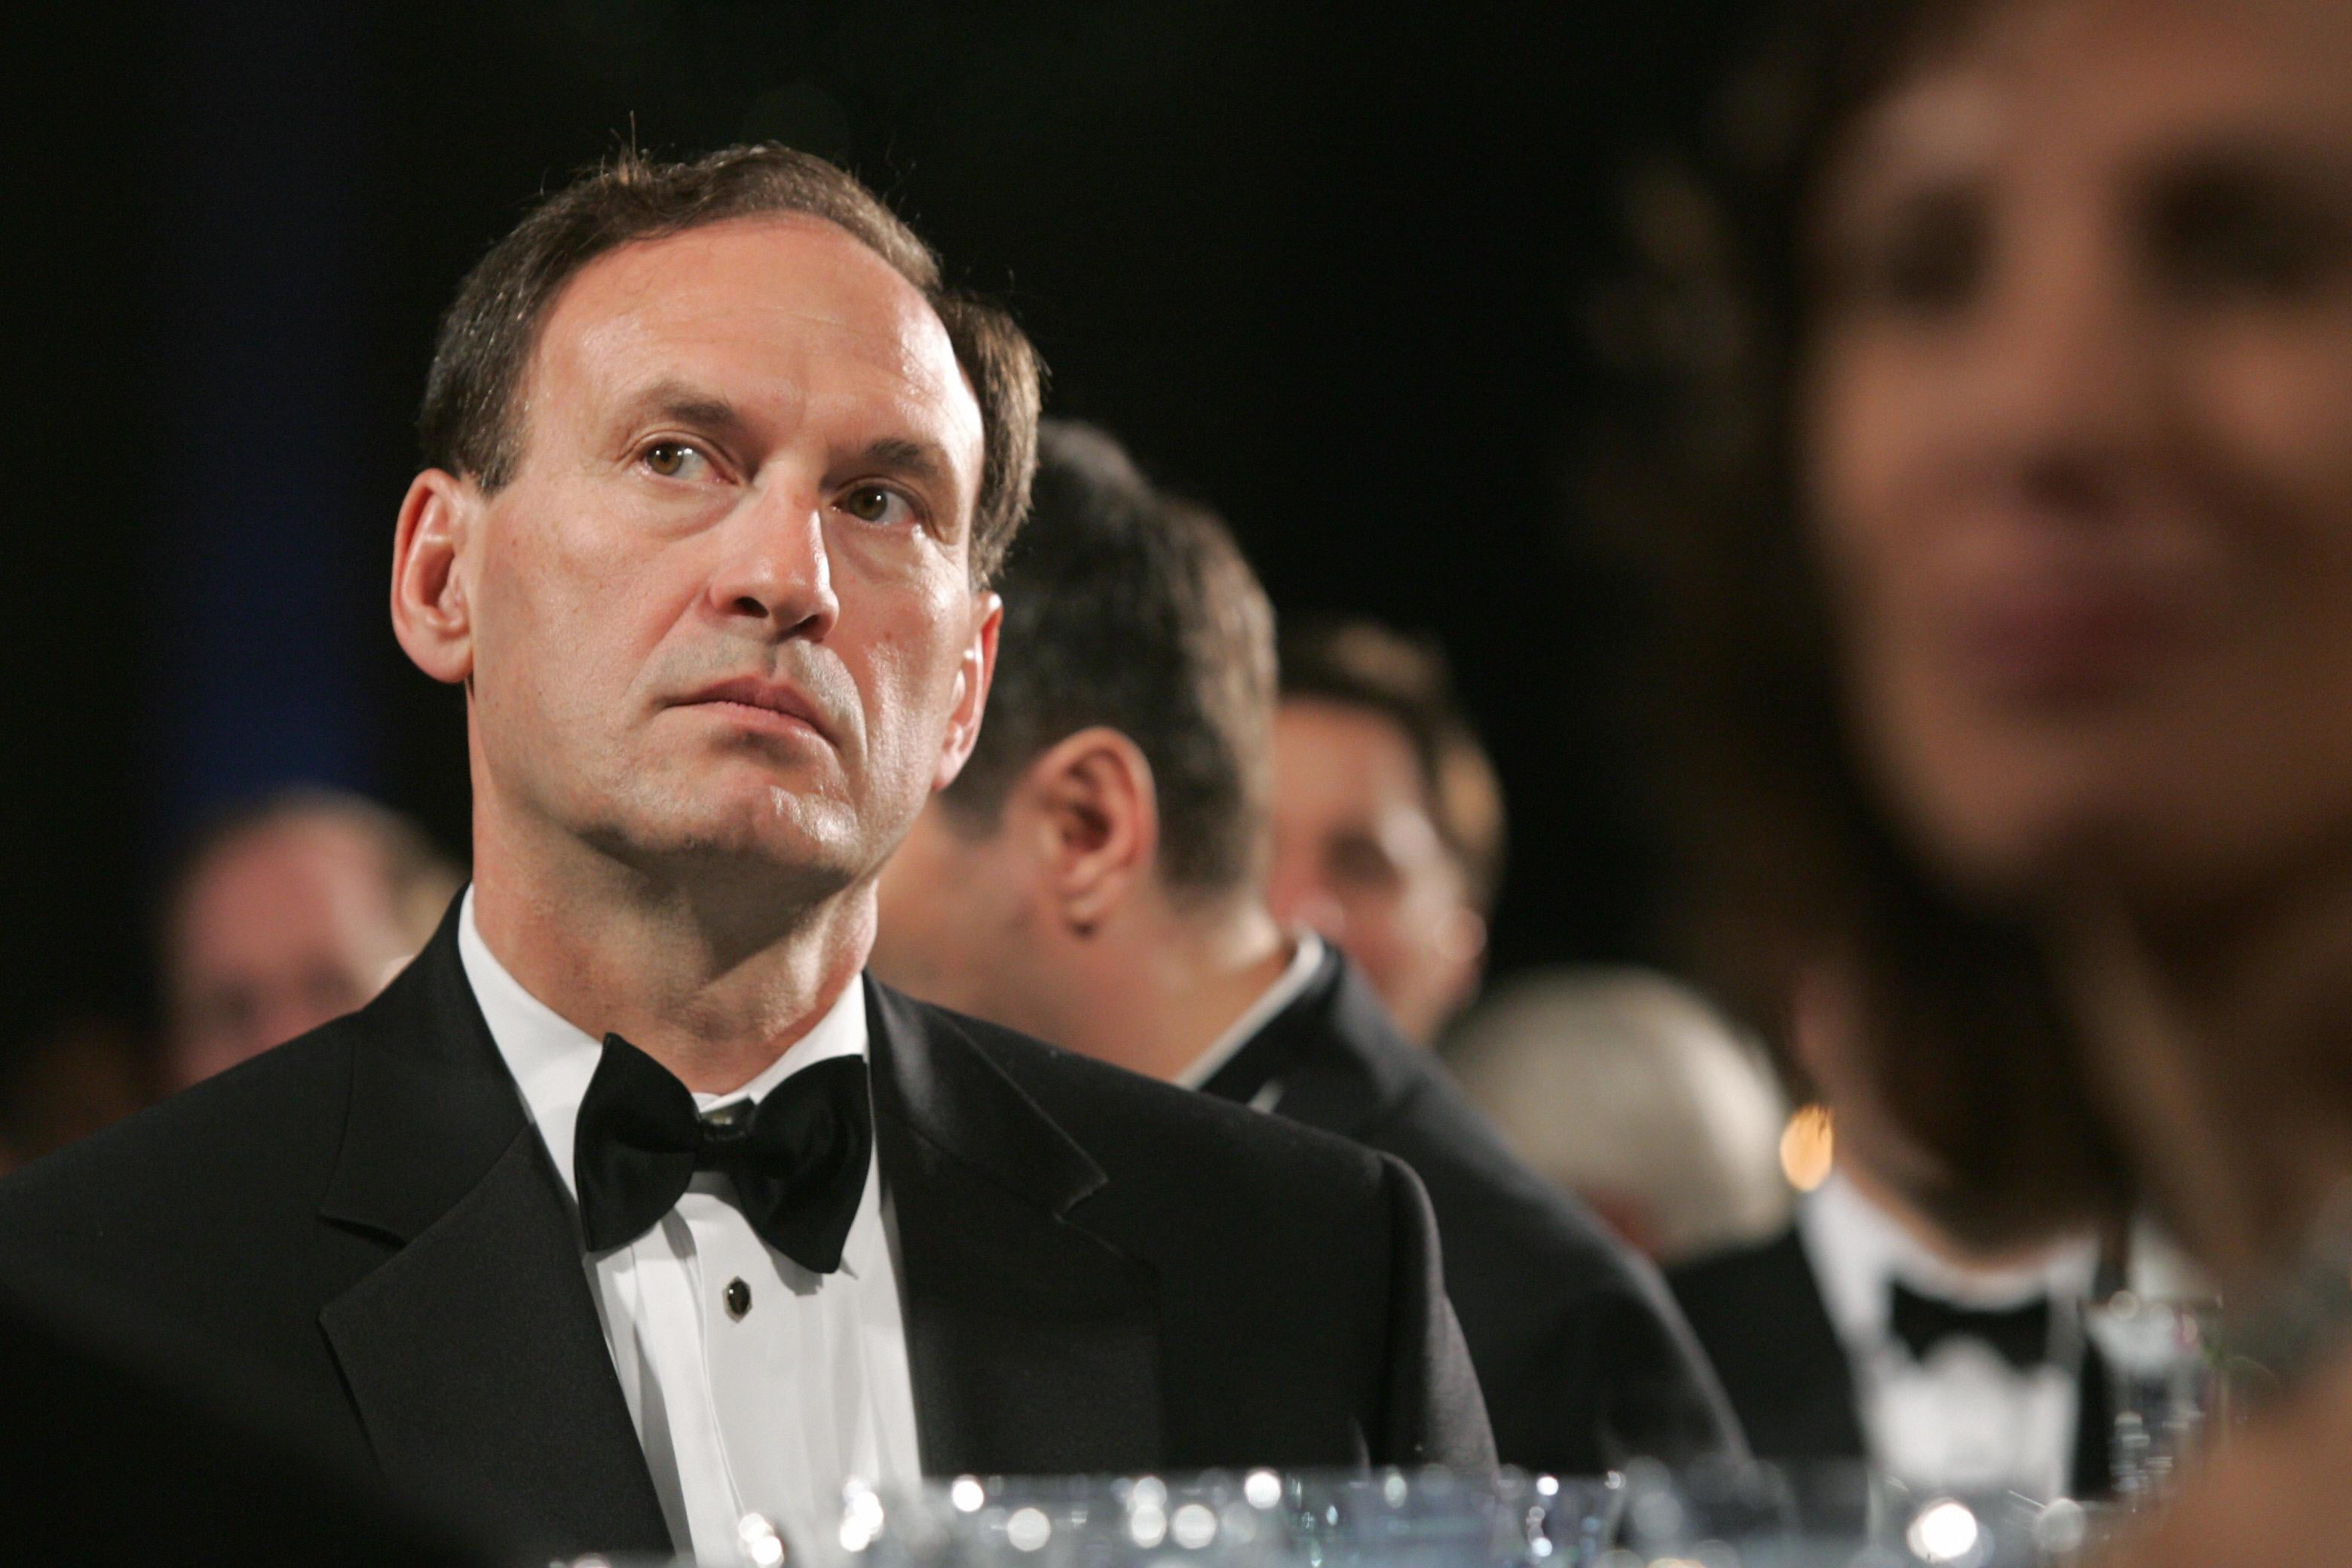 Alito in a tux looking up as he sits at a table at a fancy dinner